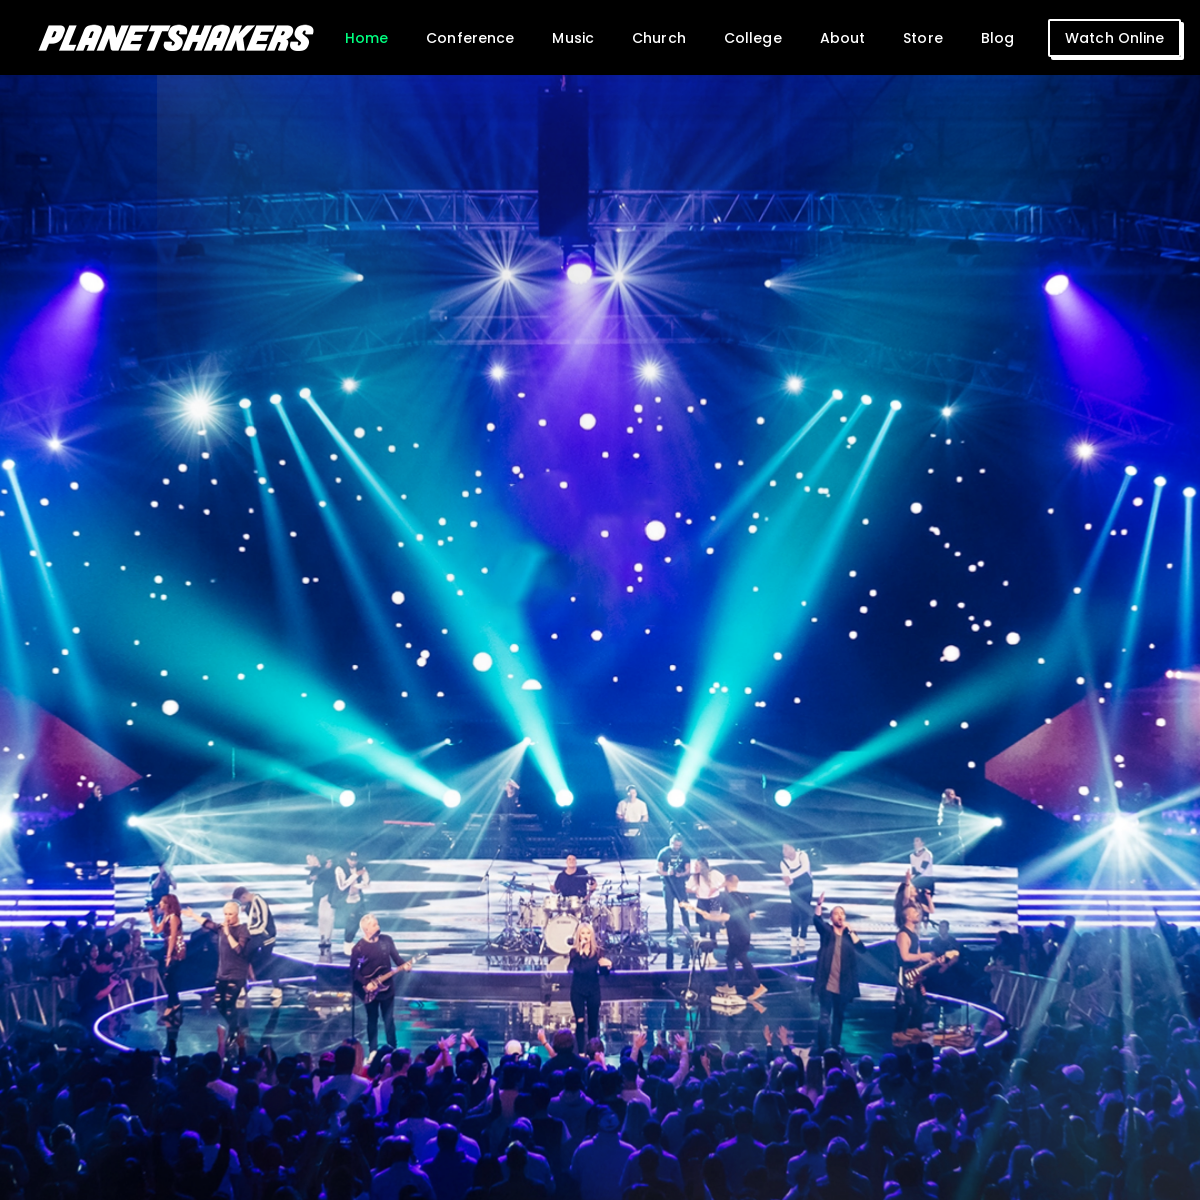 A complete backup of planetshakers.com